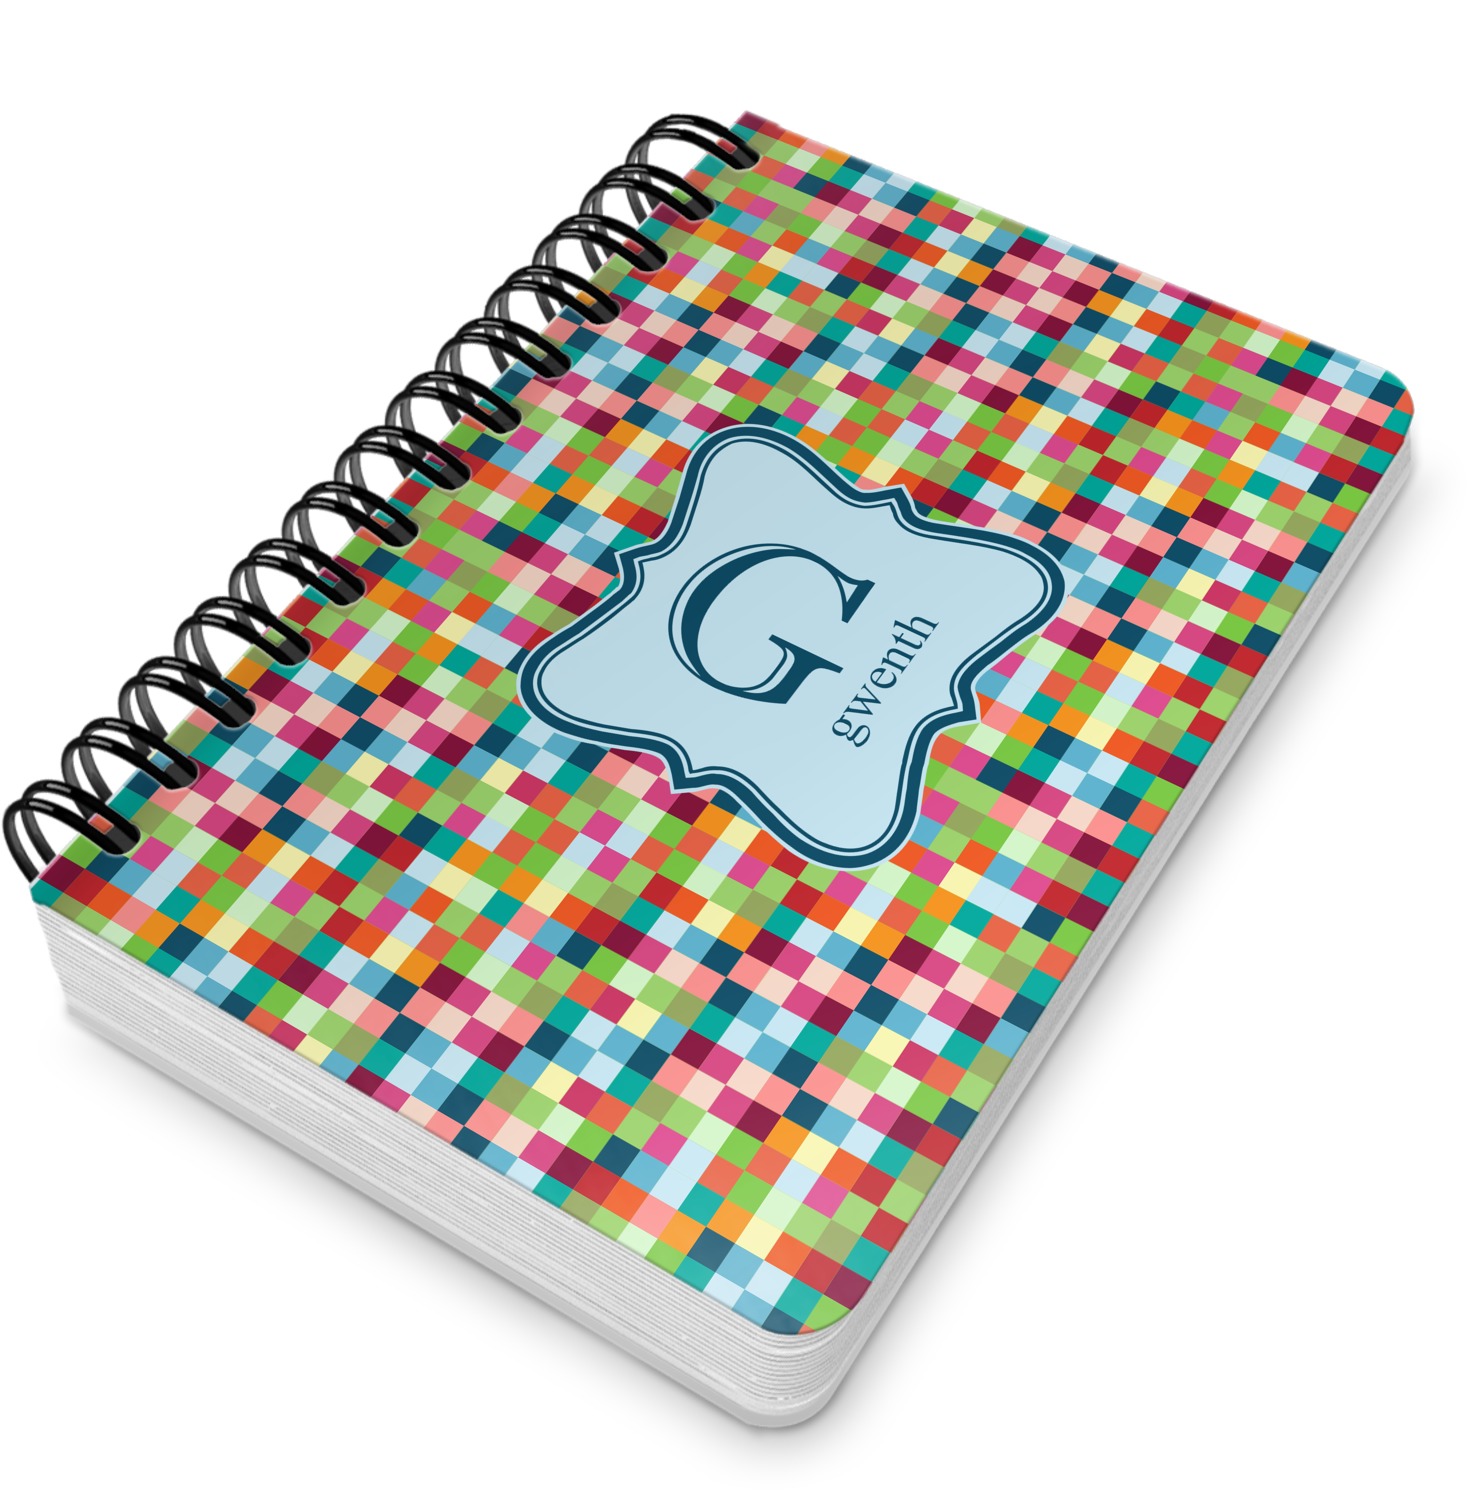 Retro Pixel Squares Spiral Bound Notebook - 5x7 (Personalized ...